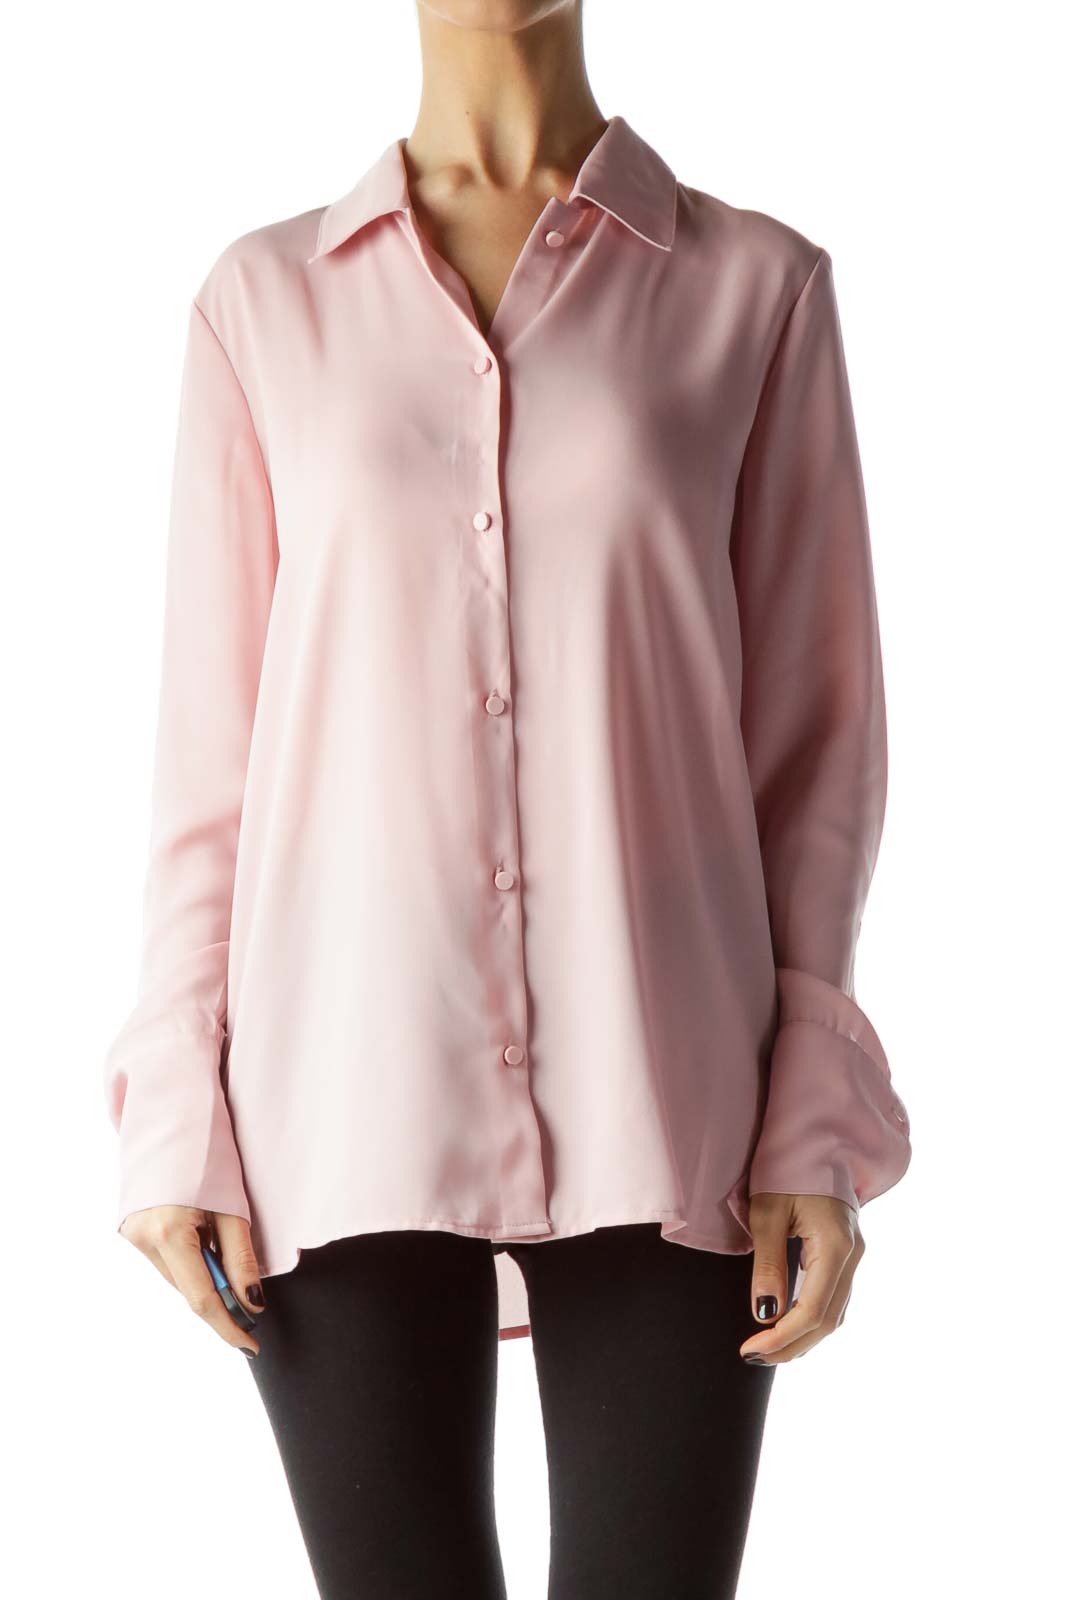 Baby Pink Light Shirt Front